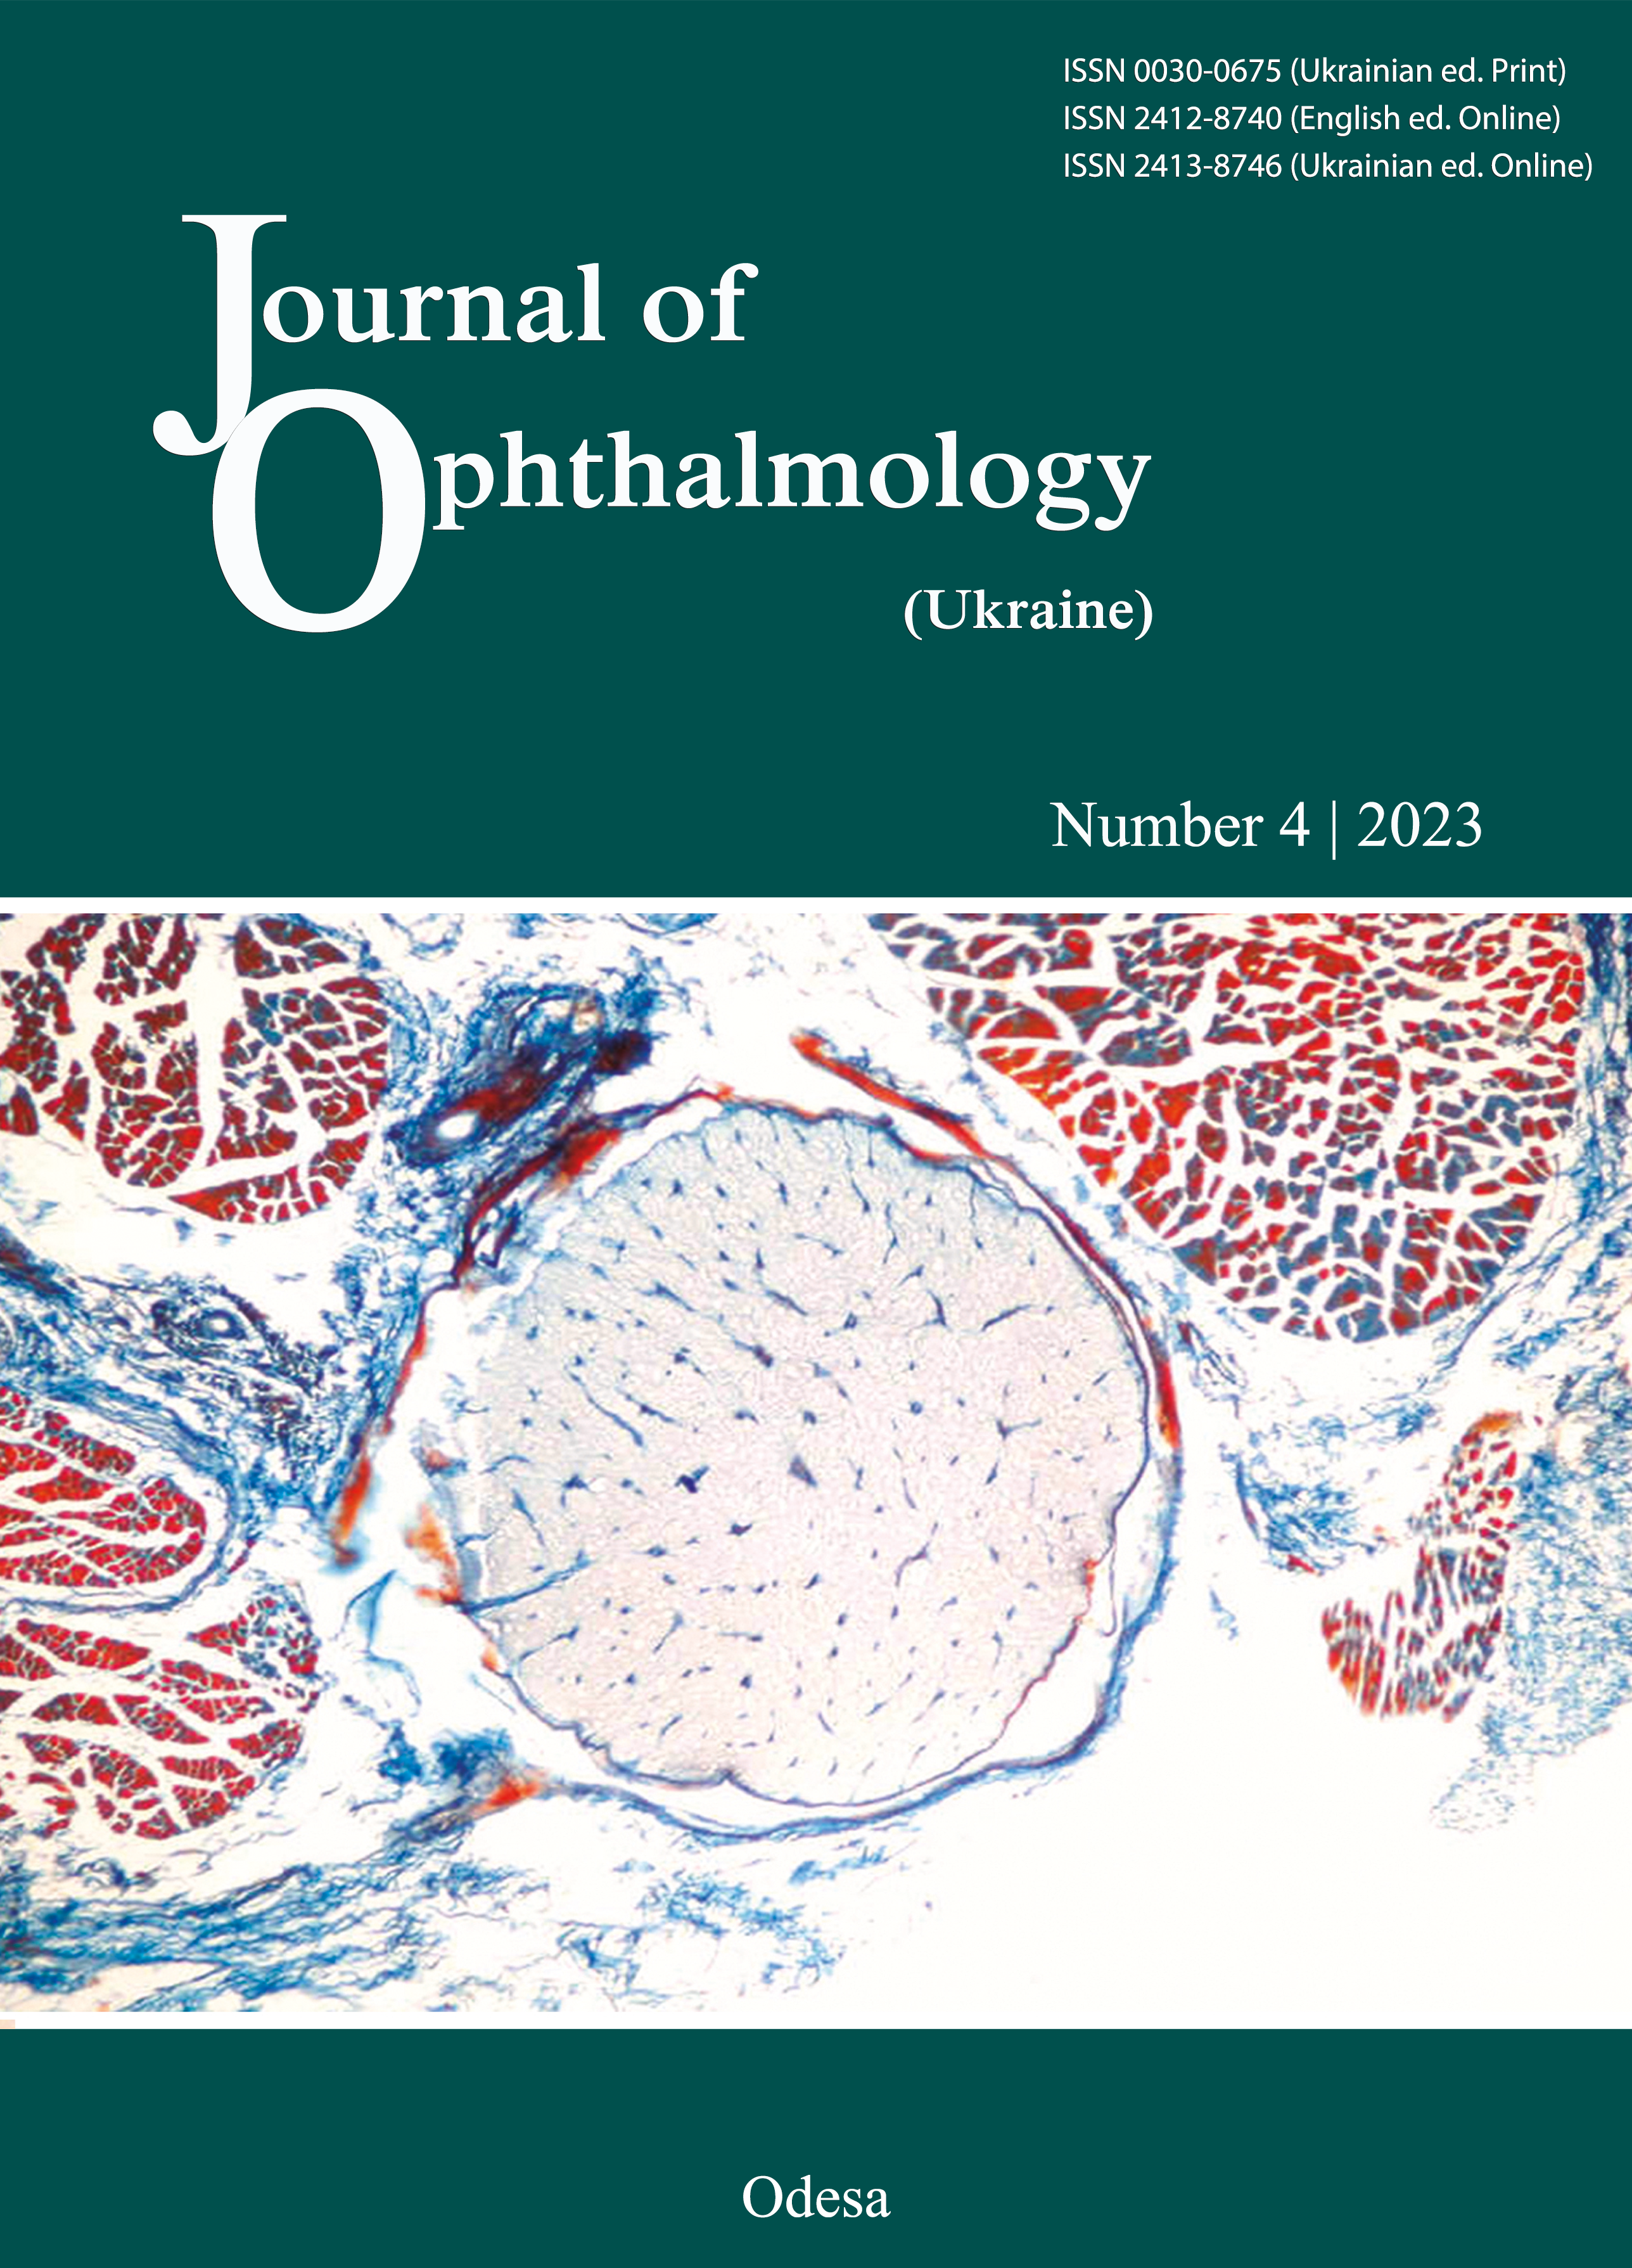 					View No. 4 (2023): Journal of Ophthalmology (Ukraine)
				